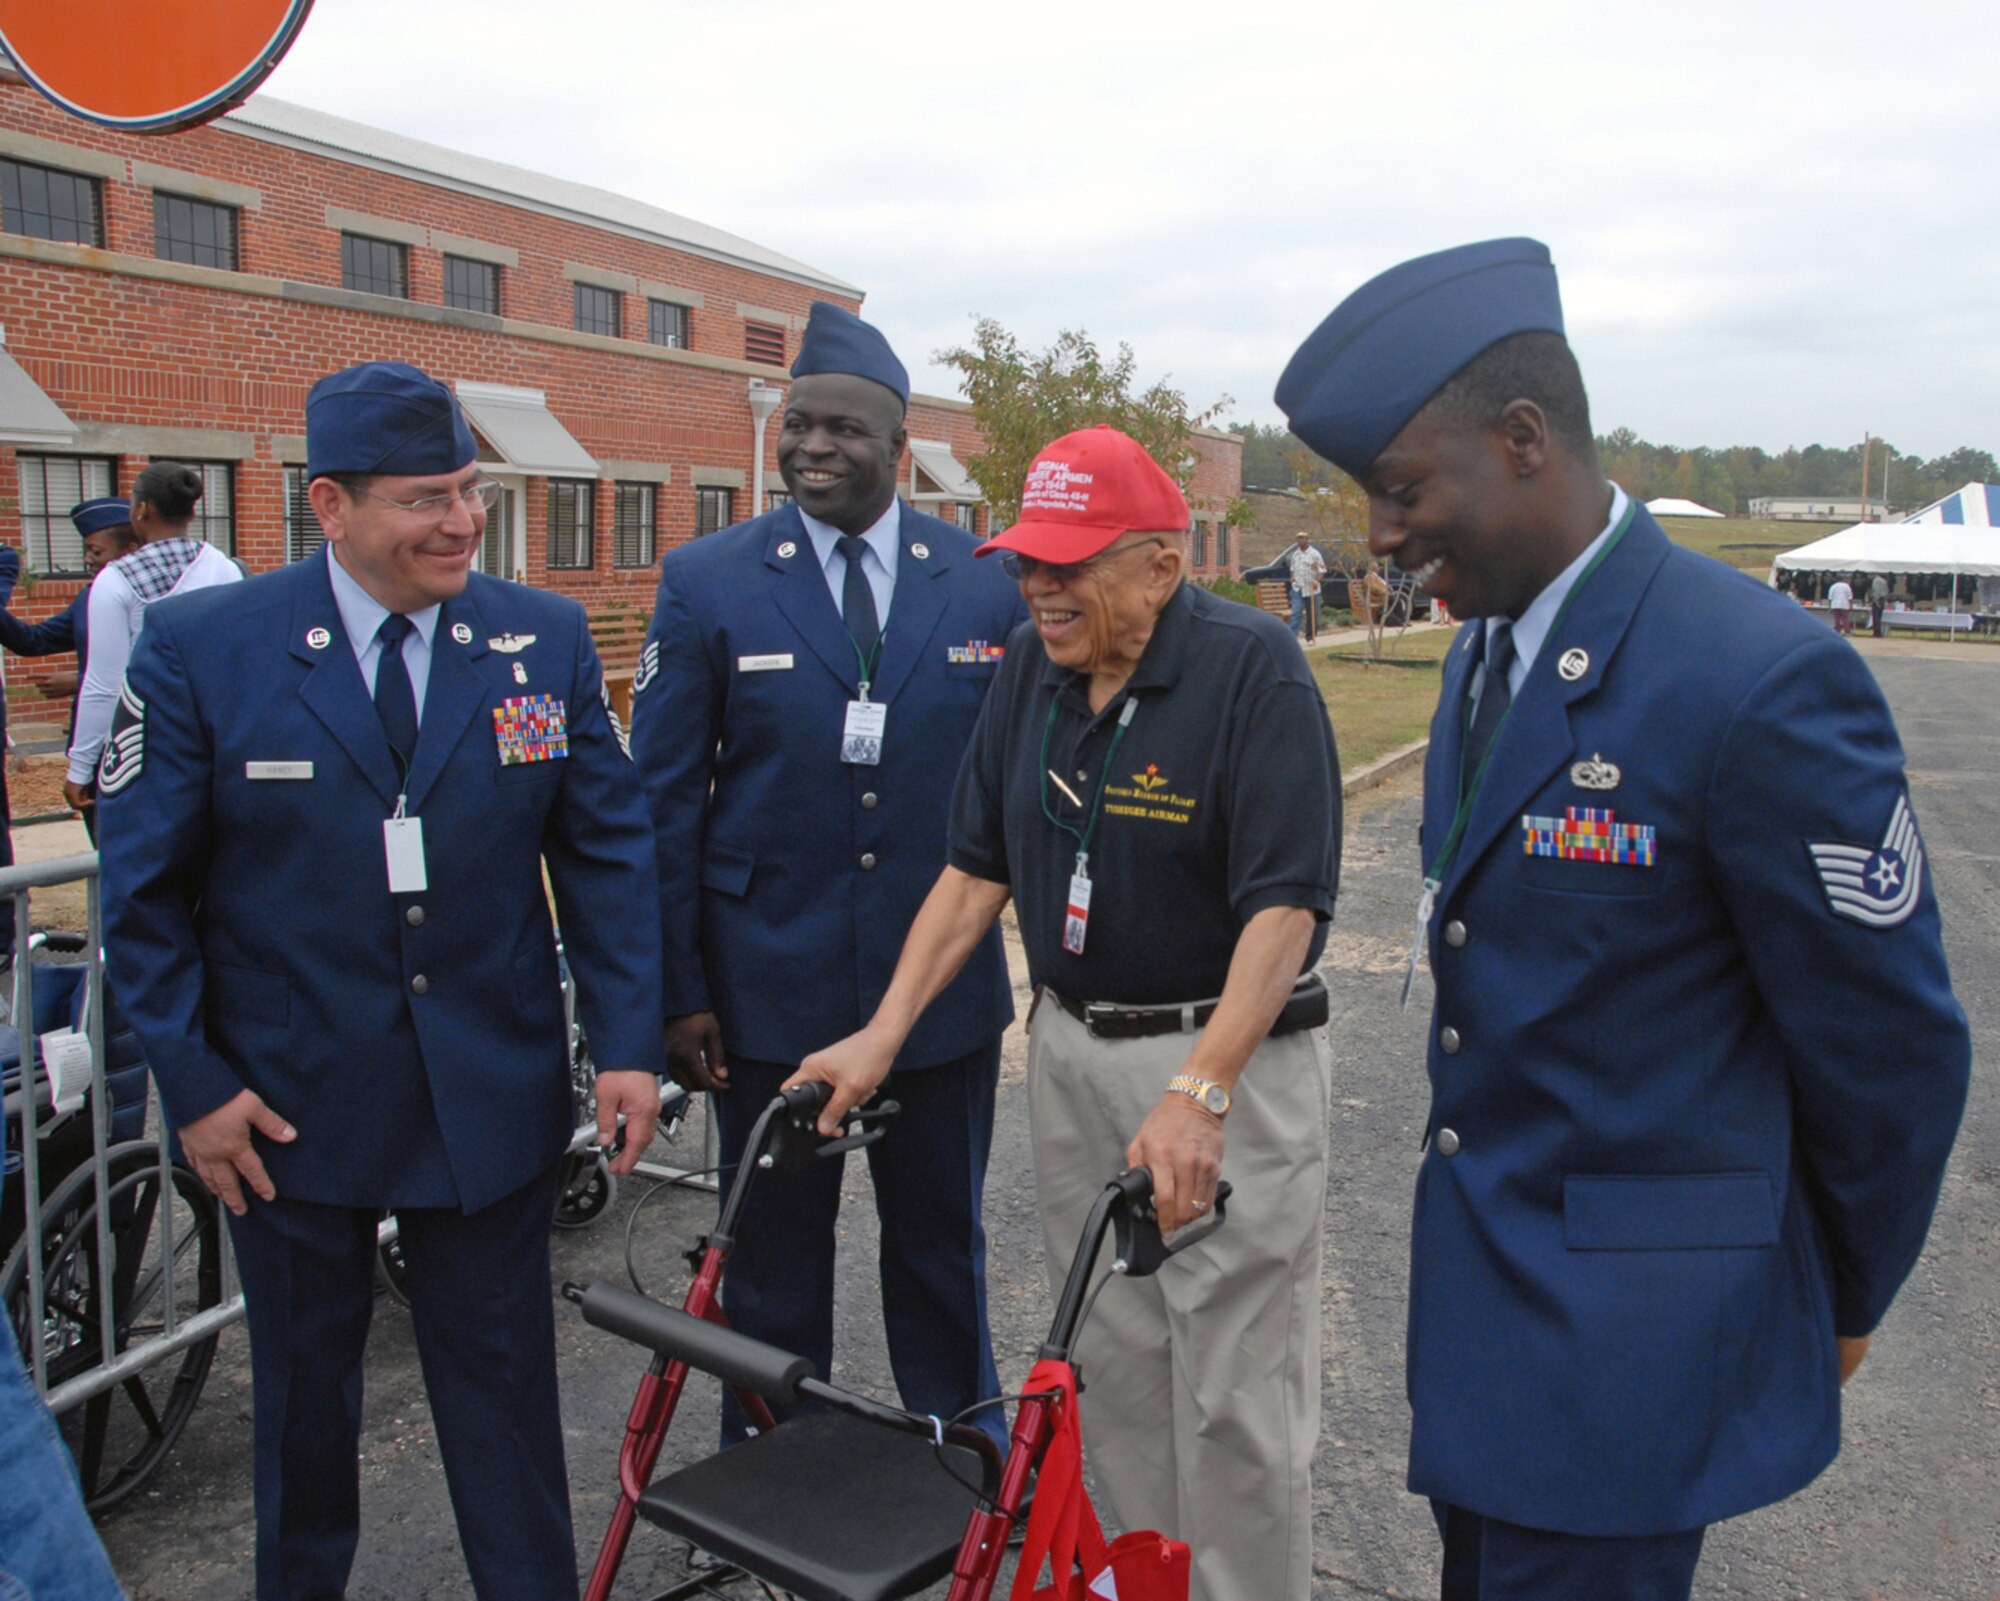 From left, 908th Airlift Wing members Senior Master Sgt. Tom Haney, Staff Sgt. Charles Jackson and Tech. Sgt. D'Wayne Guice lend assistance to an original Tuskegee Airman preparing to gain entrance to the grand opening activities for the dedication of the Tuskegee Airmen National Historic Site at Moton Field in Tuskegee, Ala. Oct. 10. Sergeants Haney, Jackson, Guice, and 23 other 908th AW from nearby Maxwell AFB serving as escorts provided assistance to 300 or so surviving Tuskegee Airmen who attended the ceremony. The famed black aviators Airmen overcame segregation and prejudice to become one of the most highly respected fighter groups of World War II. Their achievements, together with the men and women who supported them, paved the way for full integration of the U.S. military (U.S. Air Force Photo by Lt. Col. Jerry Lobb)         